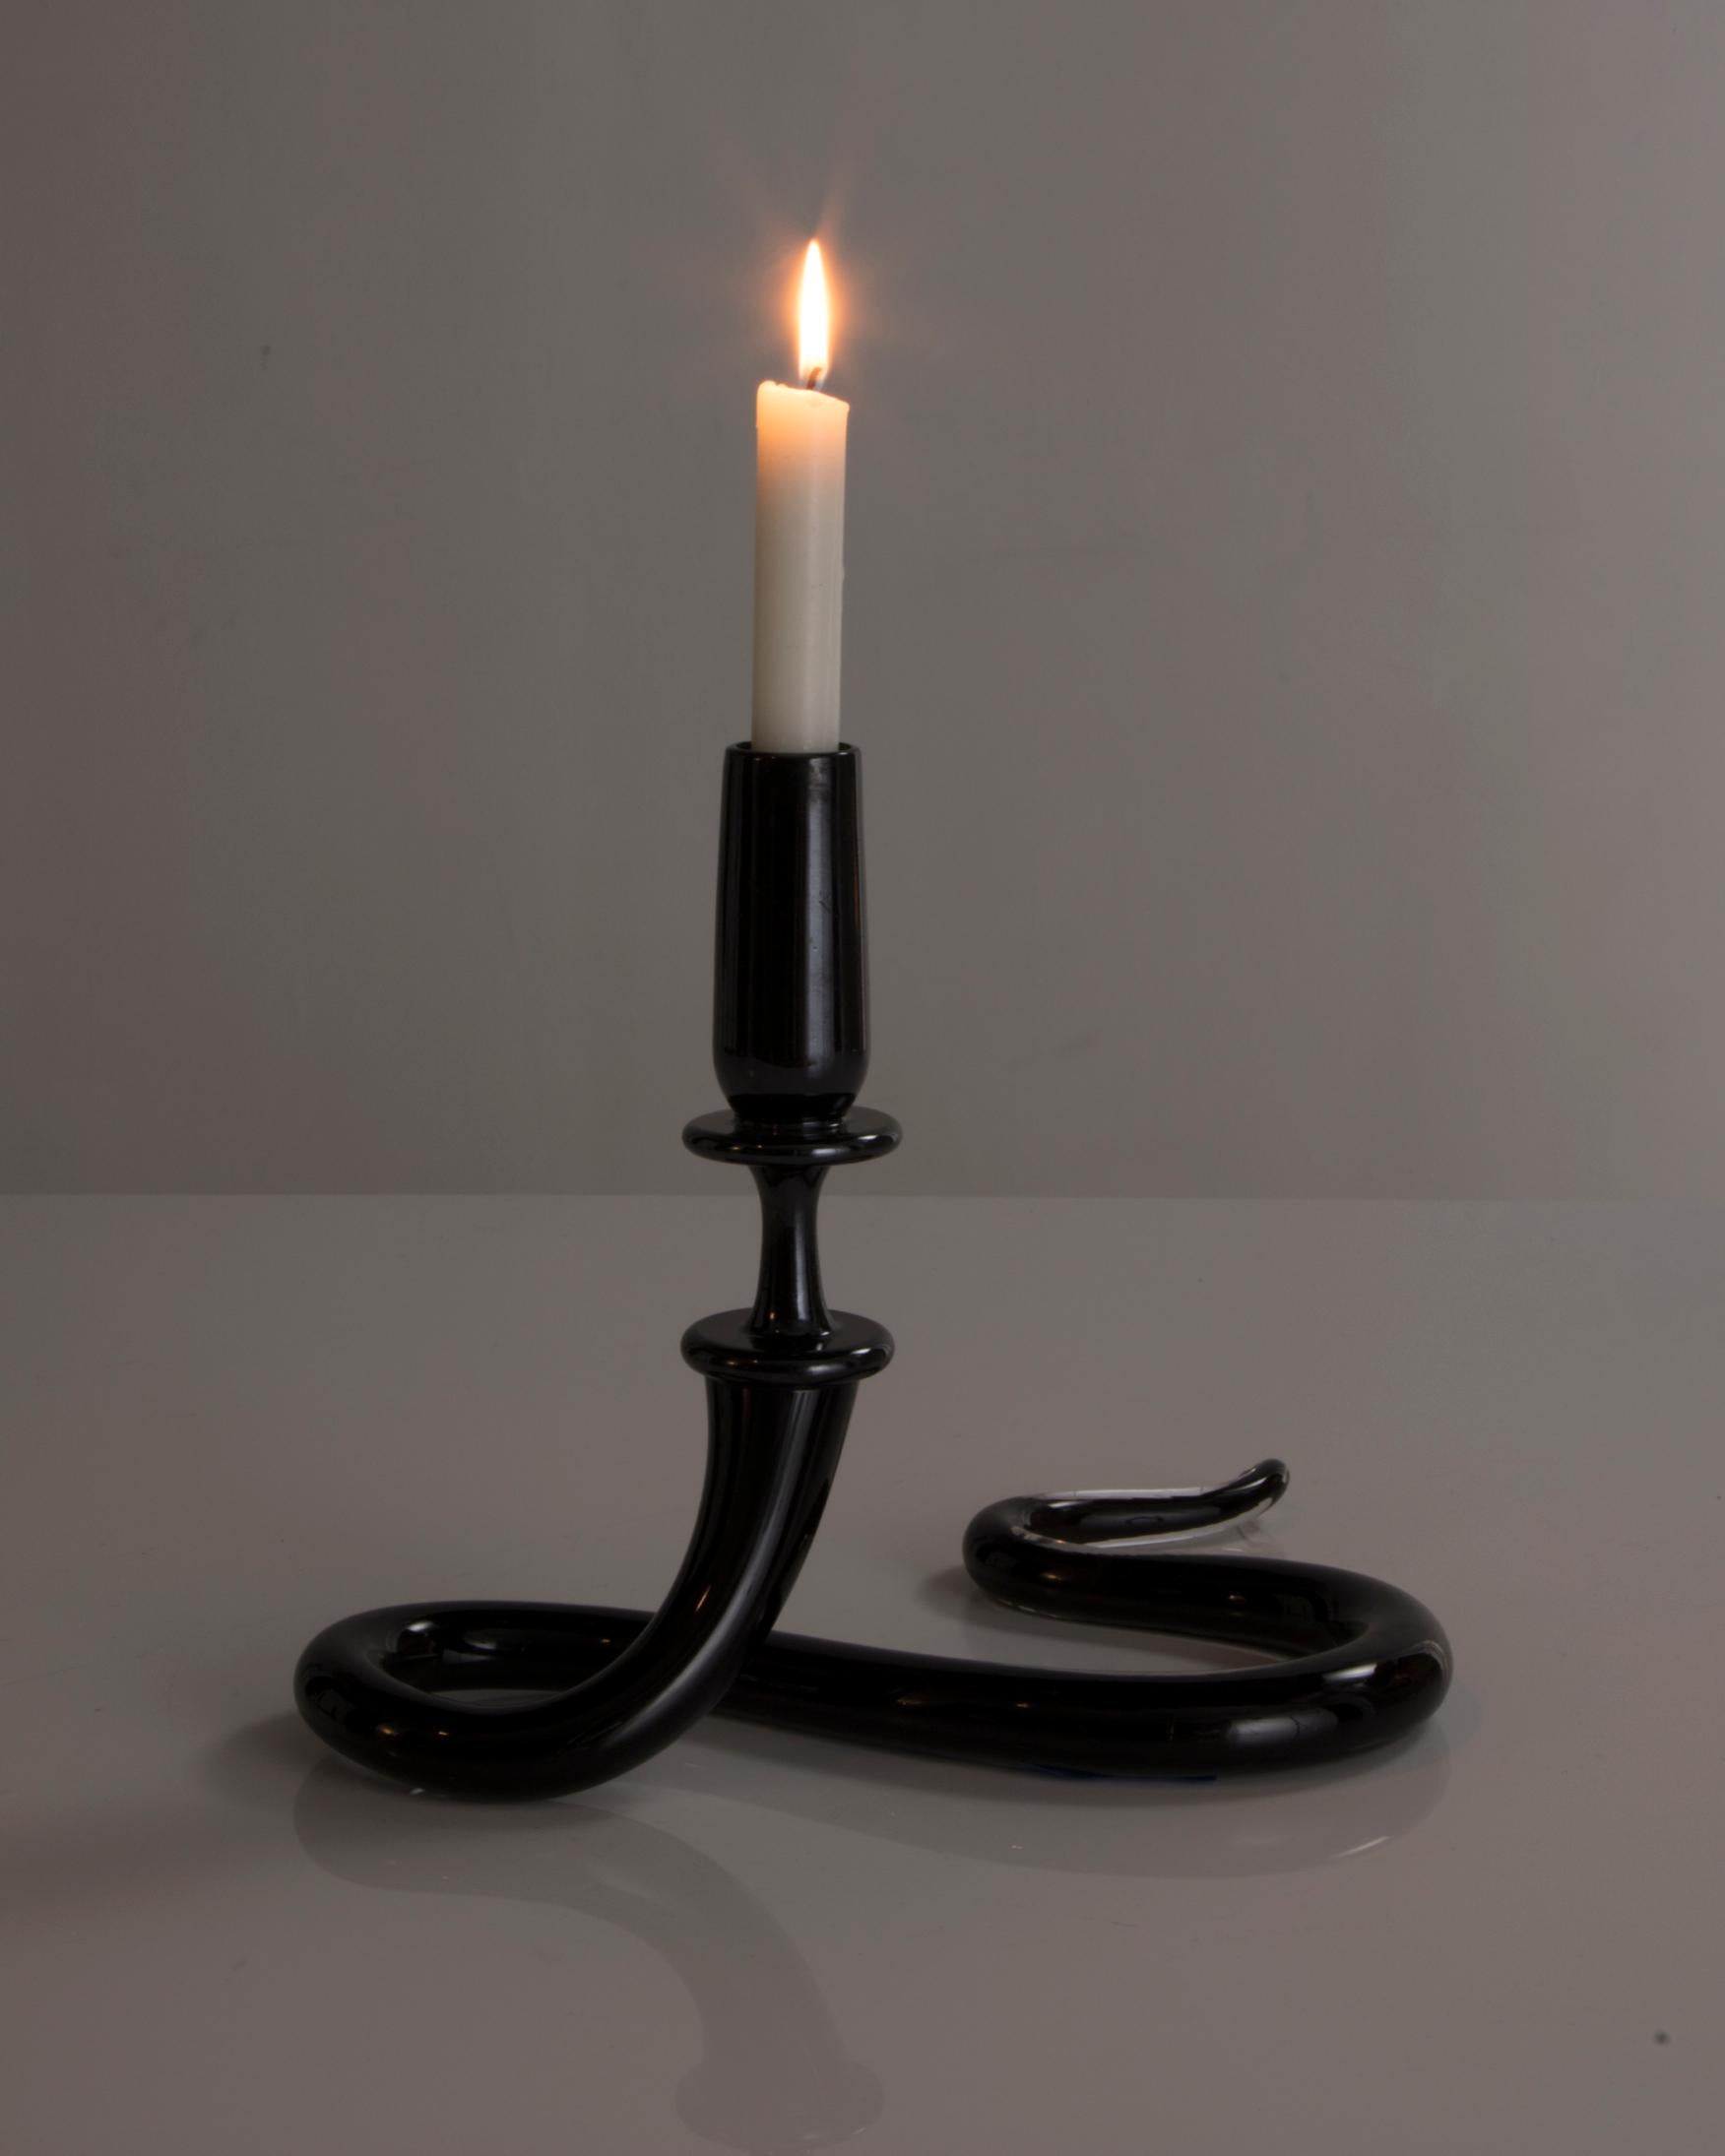 Unique single serpentine light sculpture in black hand blown glass. Designed and made by Jeff Zimmerman, USA, 2016.

Limited number available. Please note that each item may differ slightly in color and shape.